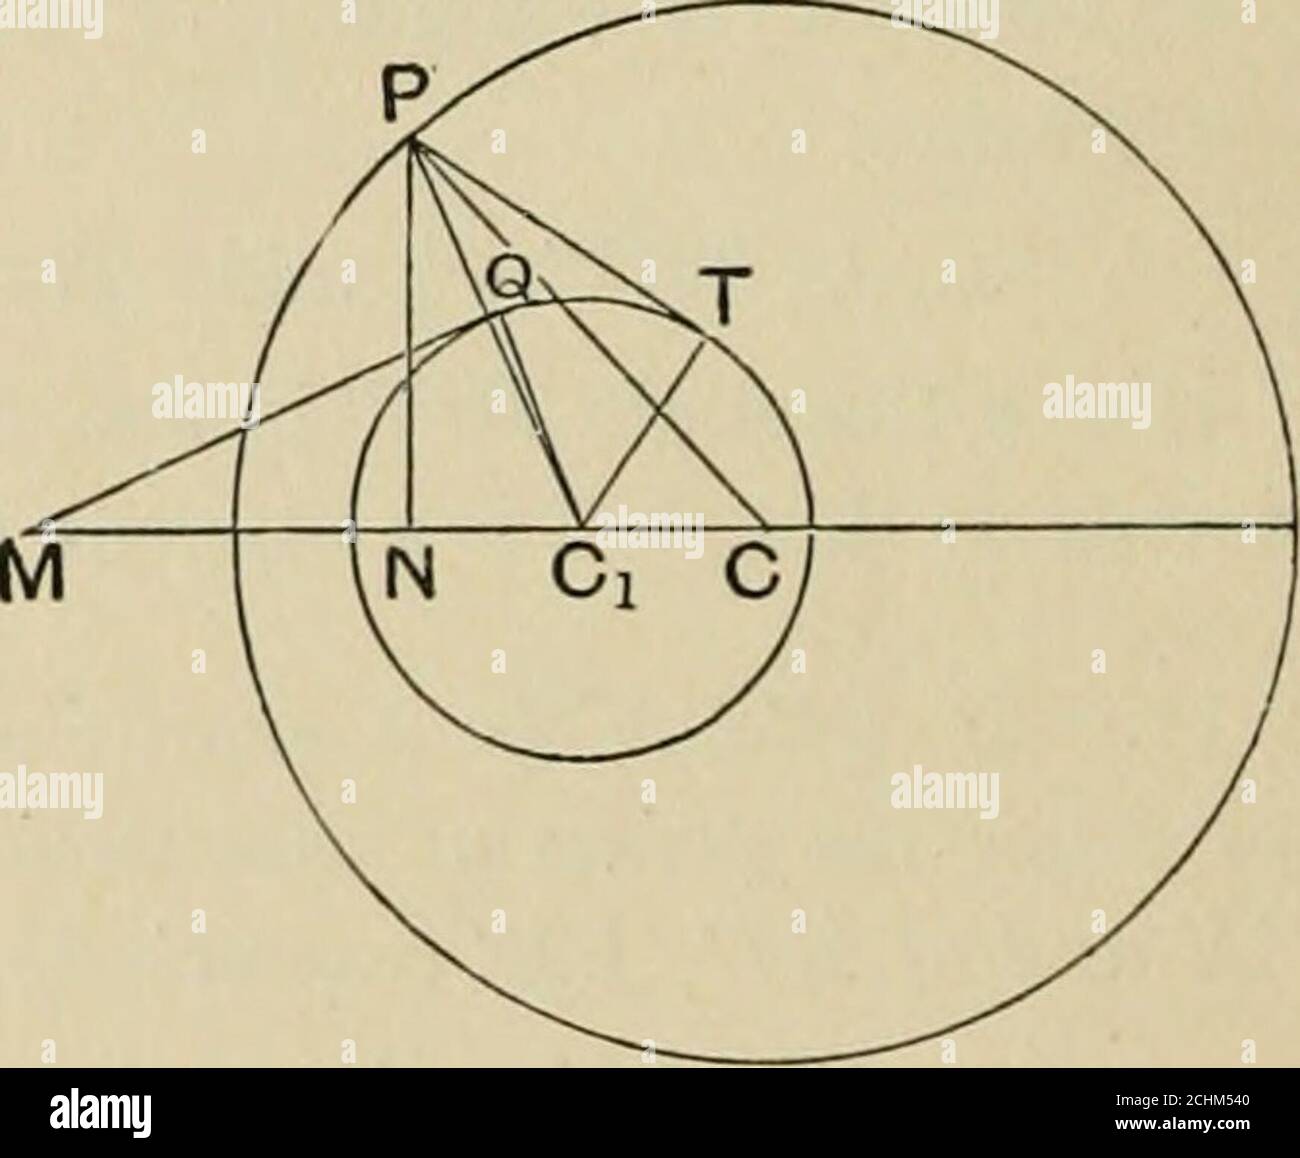 . The principles of projective geometry applied to the straight line and conic . re the radical axis of two circles, whose centres anand Ci, meets their line of centres, then thesquare of the tangent from any point P on thefirst circle to the second circle is equal to2. CCi. JVAf, when N is the foot of the perpen-dicular from P on the line of centres. Let PT be a tangent to the circle centre C^from P a point on the circle centre C, and letR and r be the radii of the circles, then PT^=CyP^-r^ =^cCi^-2.cjy.cCi+ii^-r- = CCi^-2.CJV.CCi + CIP-CyM^ since the tangents from M to the circles are equal= Stock Photo